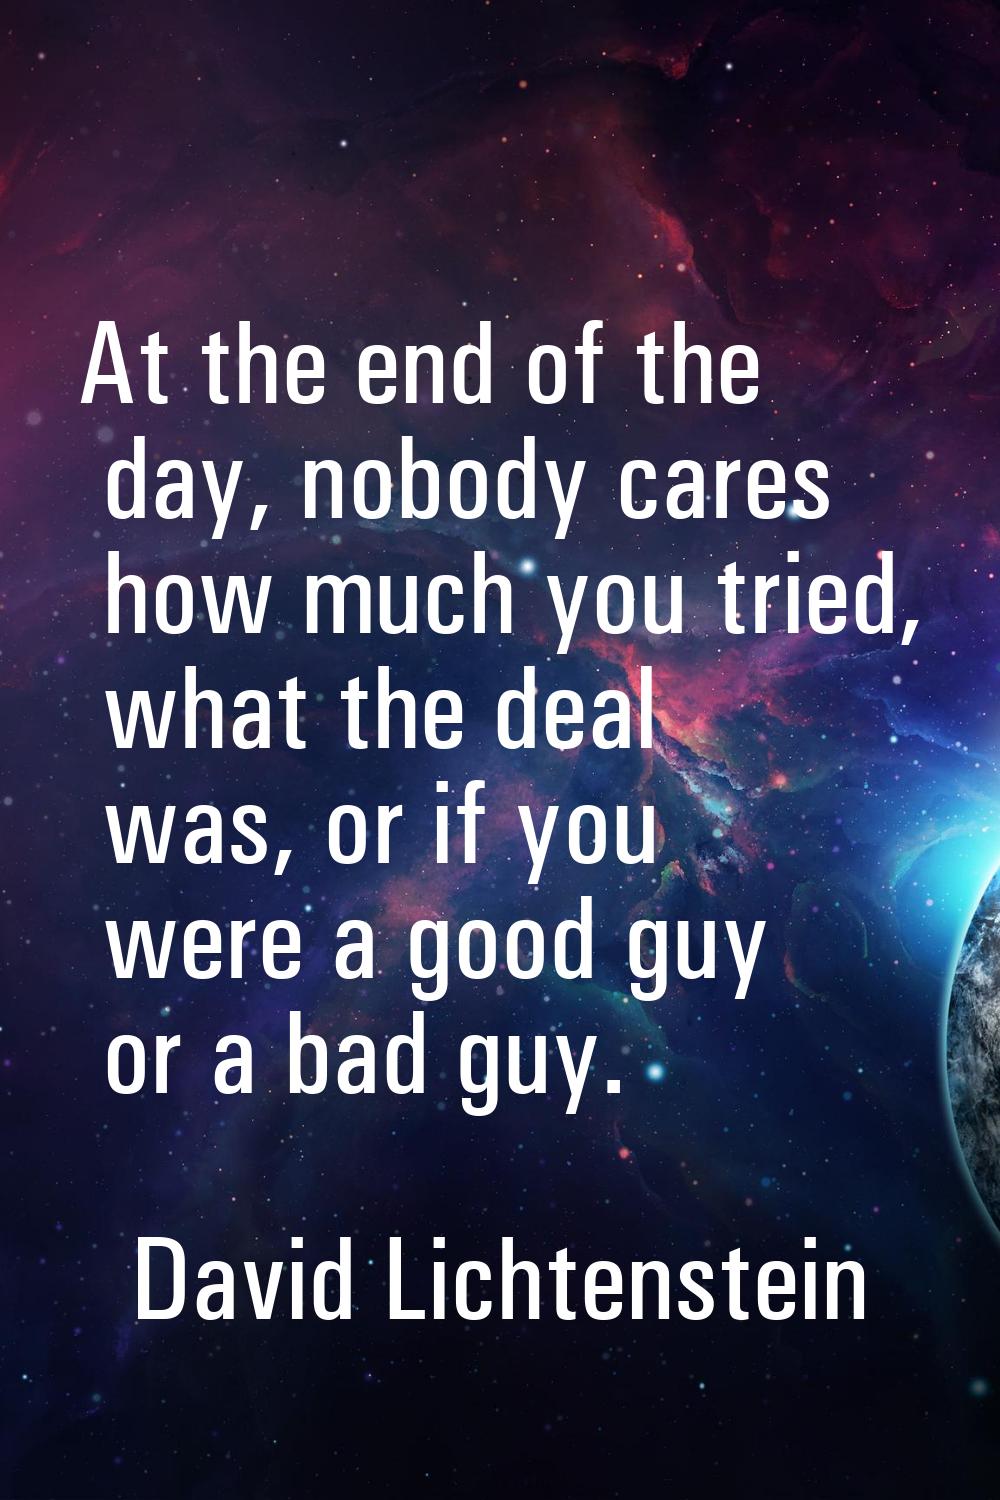 At the end of the day, nobody cares how much you tried, what the deal was, or if you were a good gu